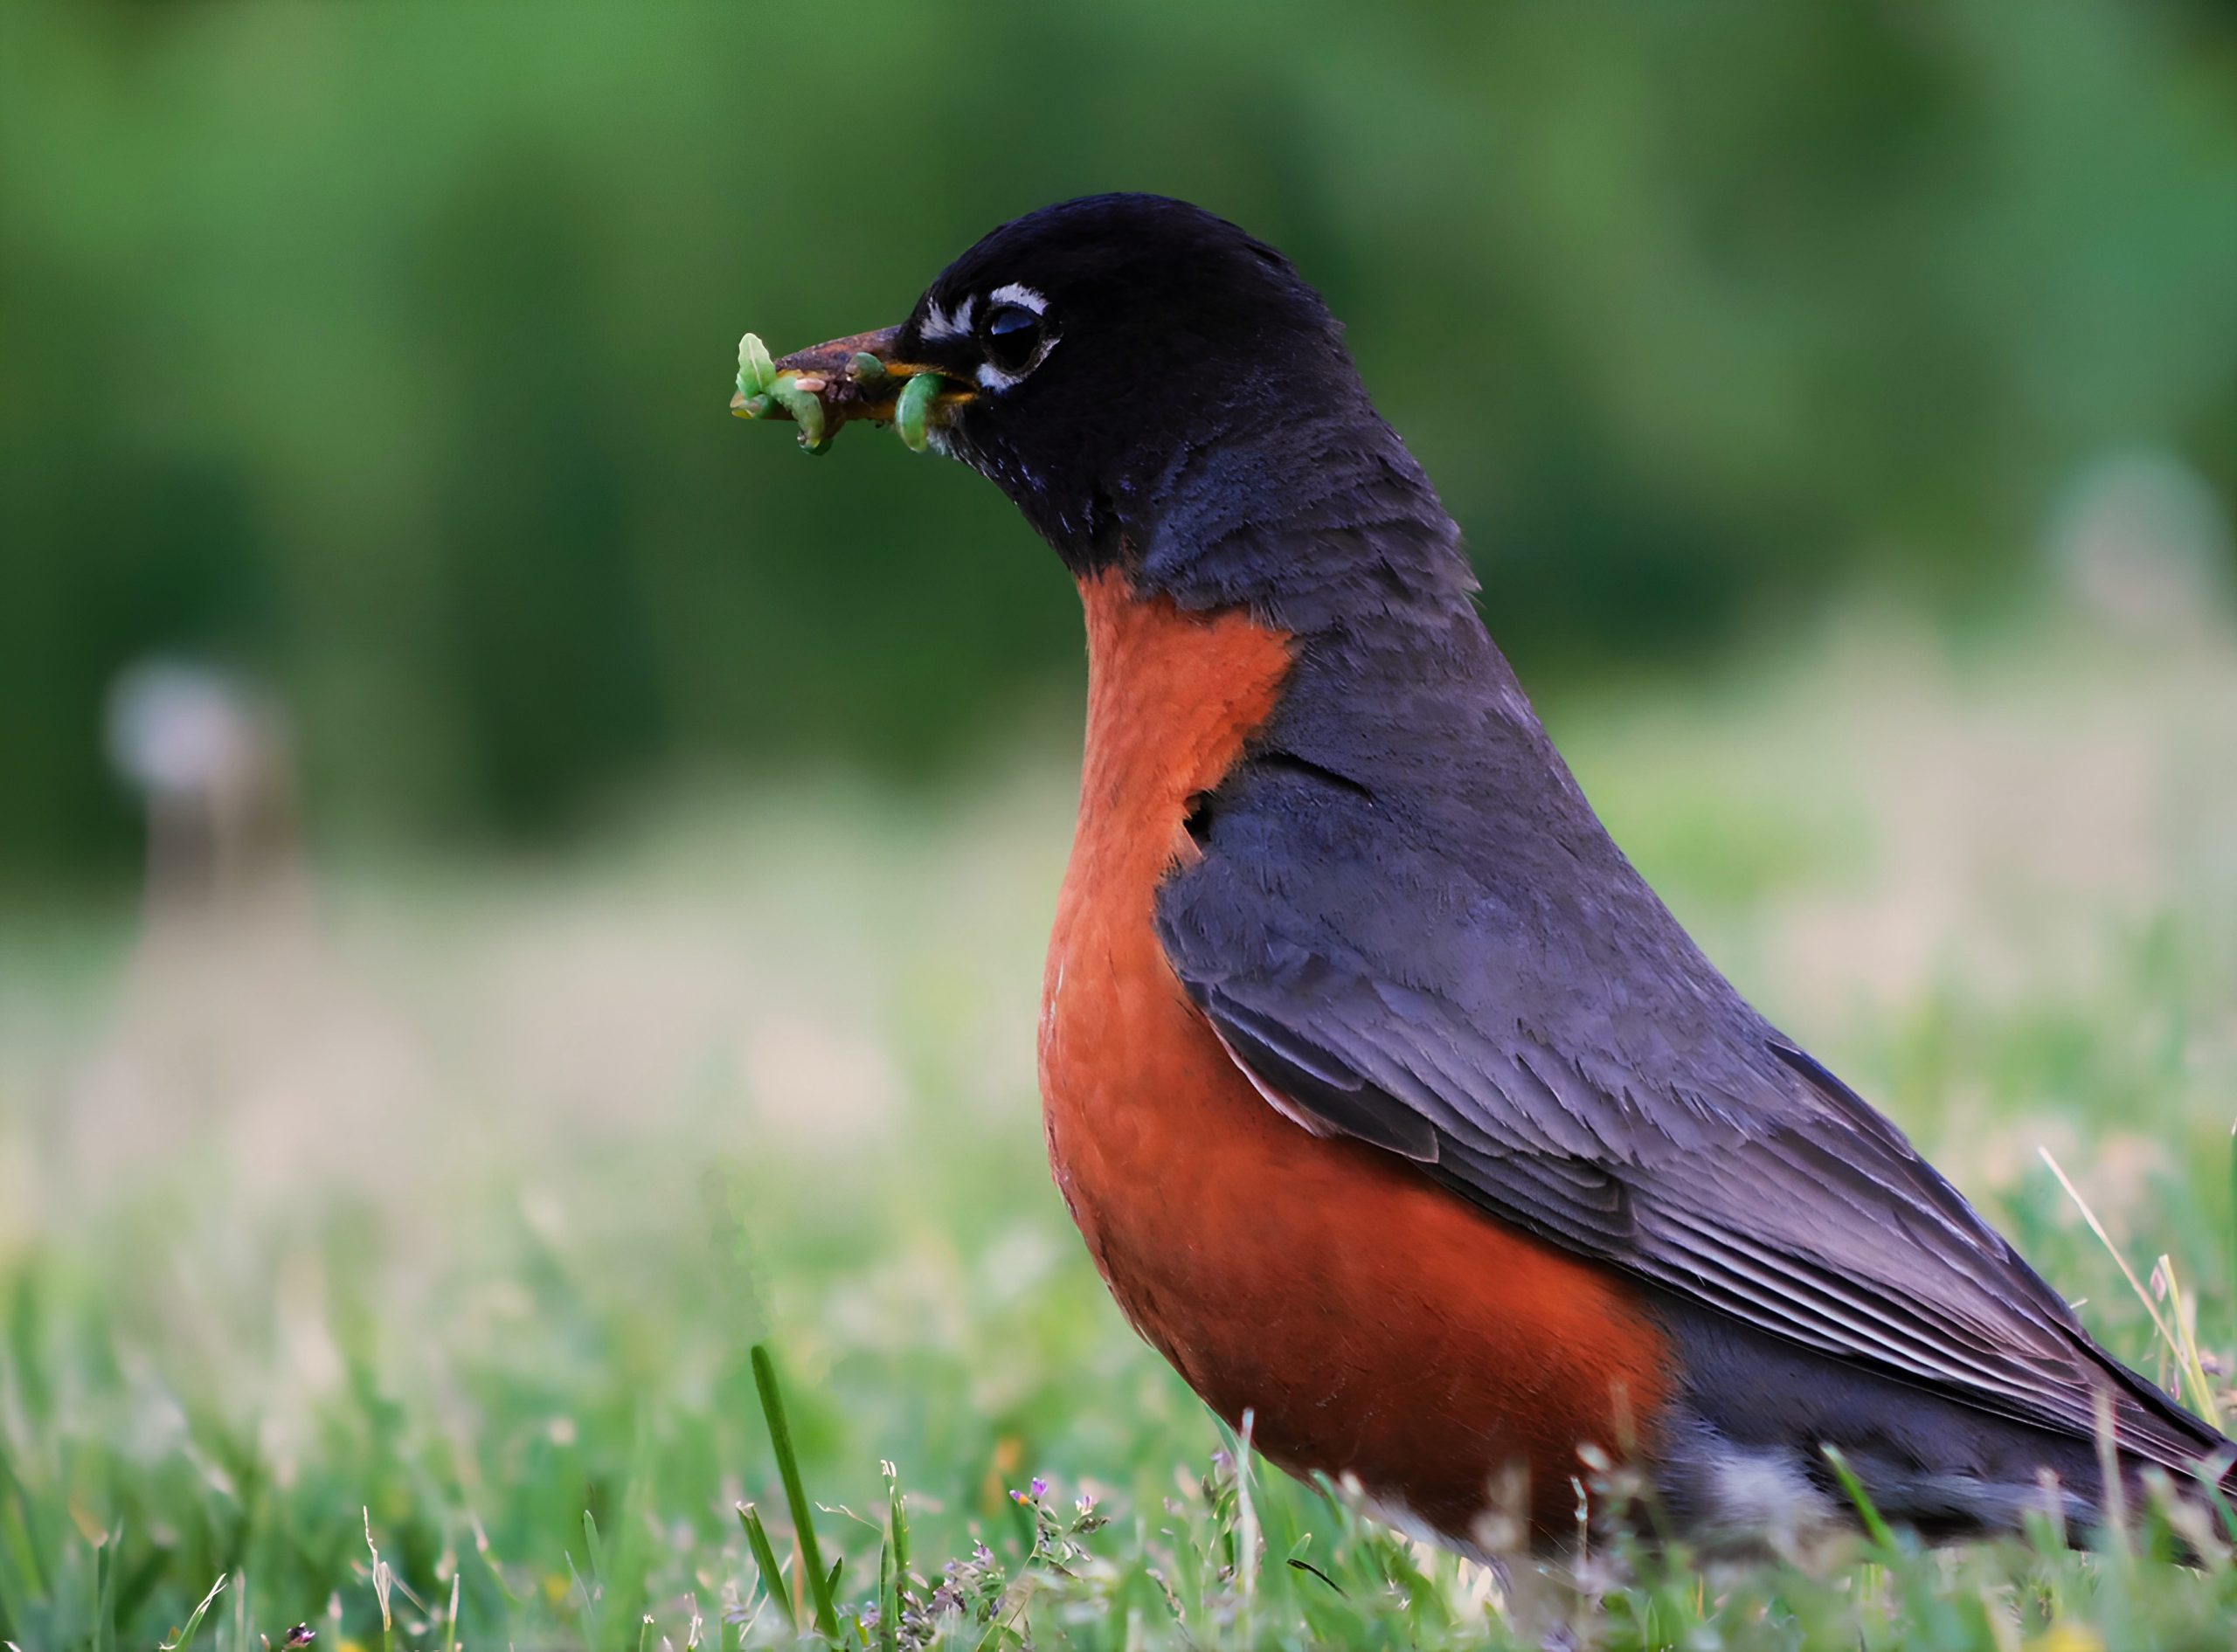 Photograph of robin with a mouth full of worms.